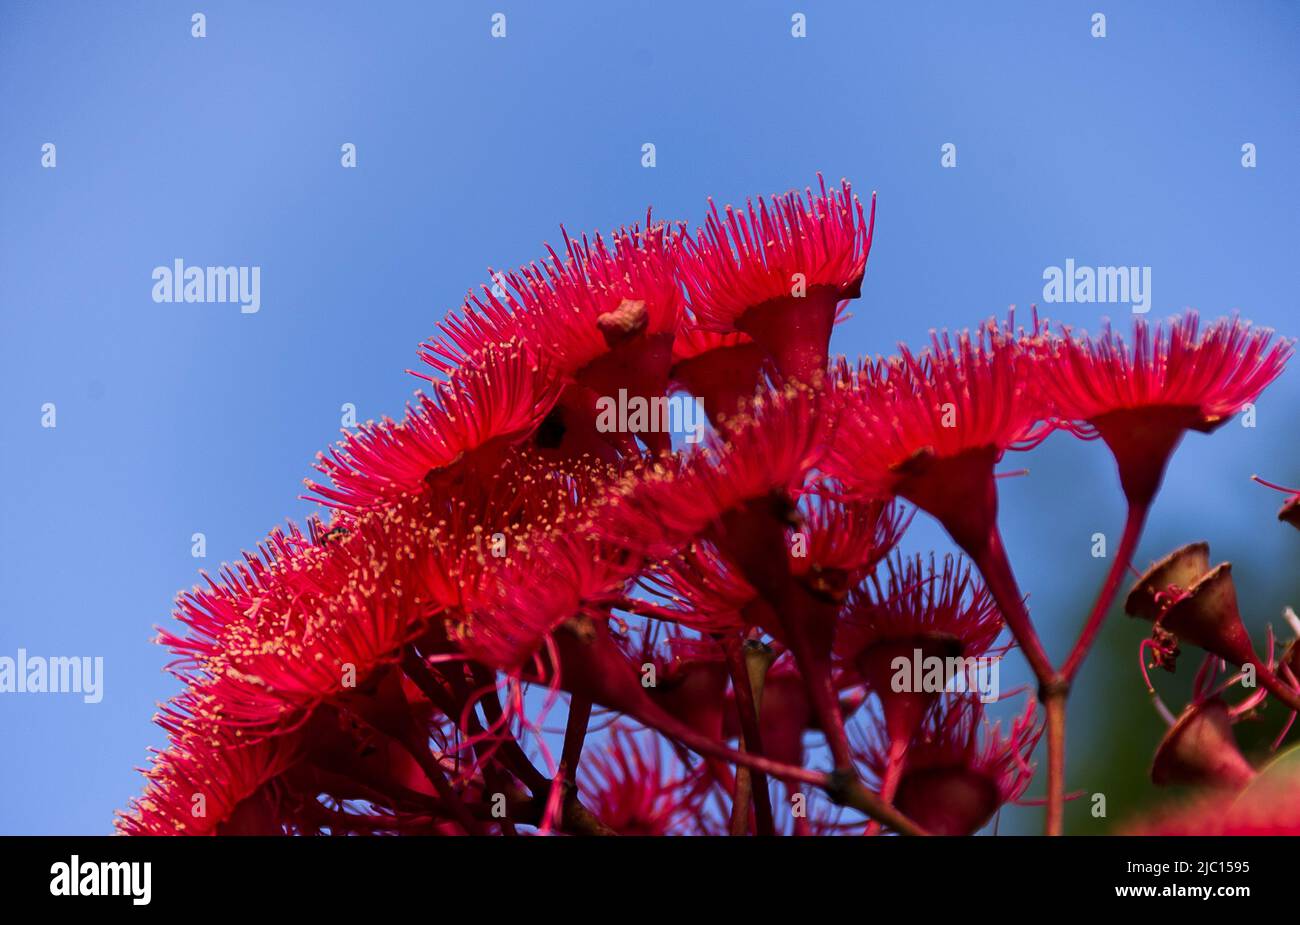 Bright pink and red flowers of Australian Red Flowering Gum, Corymbia ficifolia, against a blue sky. Queensland garden. Copy Space. Stock Photo